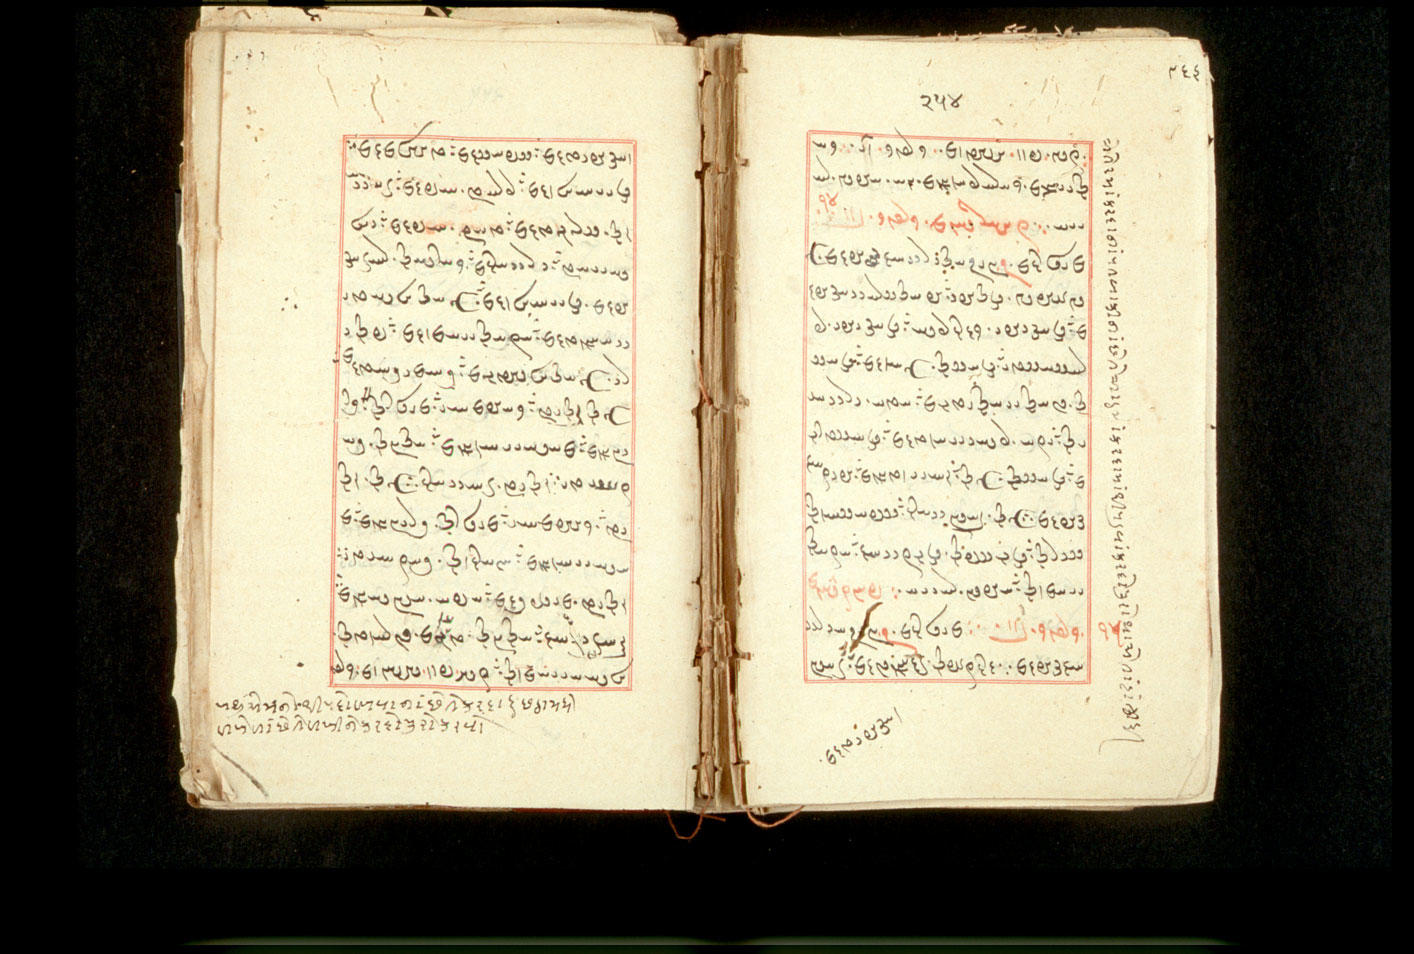 Folios 254v (right) and 255r (left)